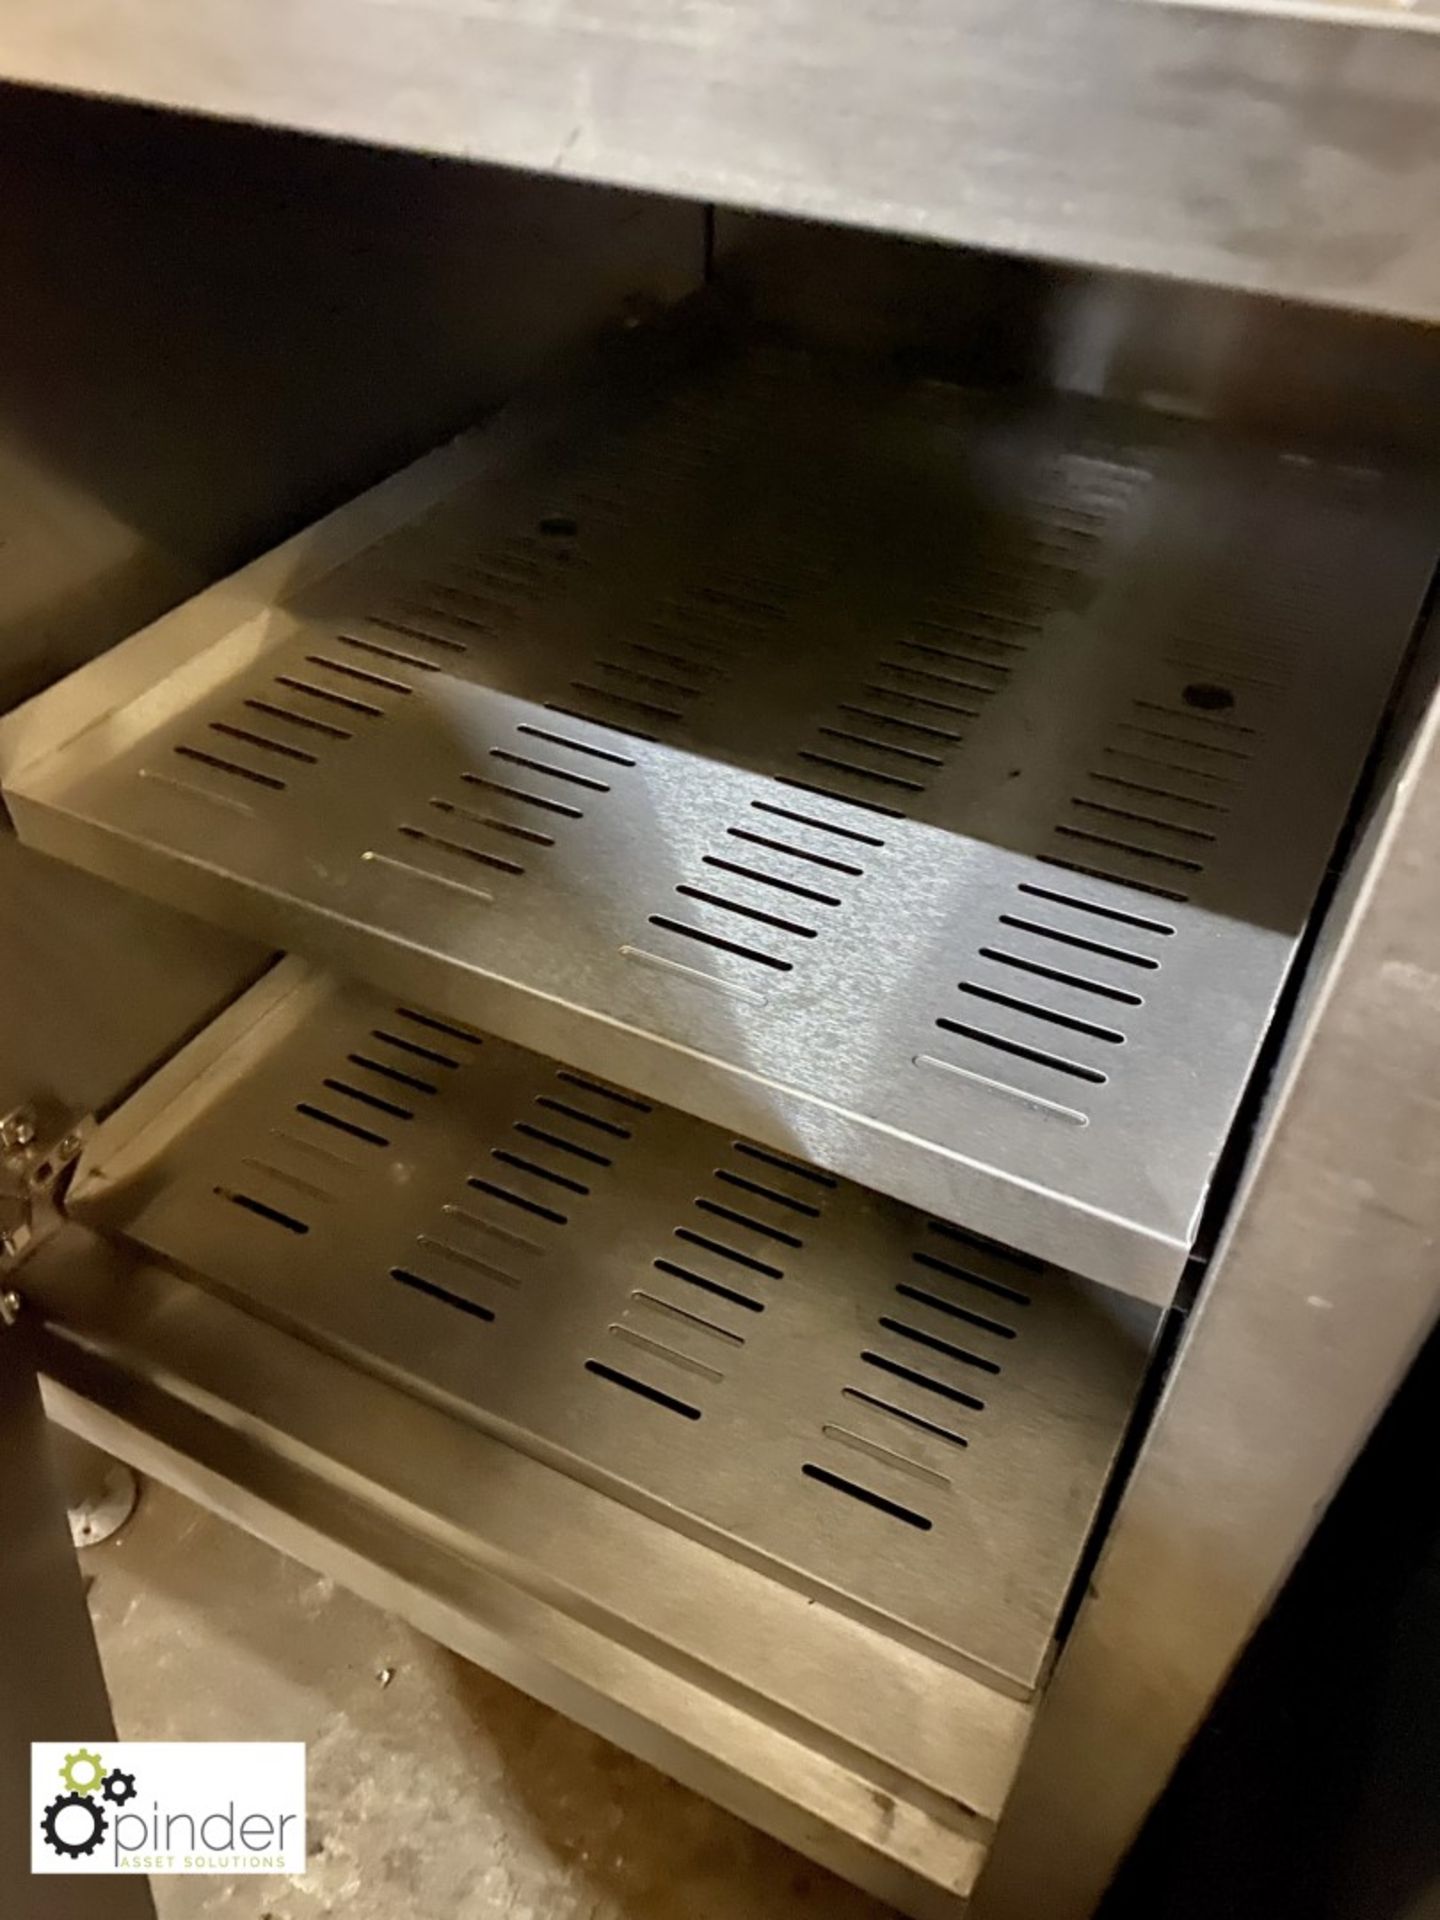 CED HC BNI stainless steel Bain Marie, 240volts, 570mm x 770mm x 960mm - Image 3 of 4